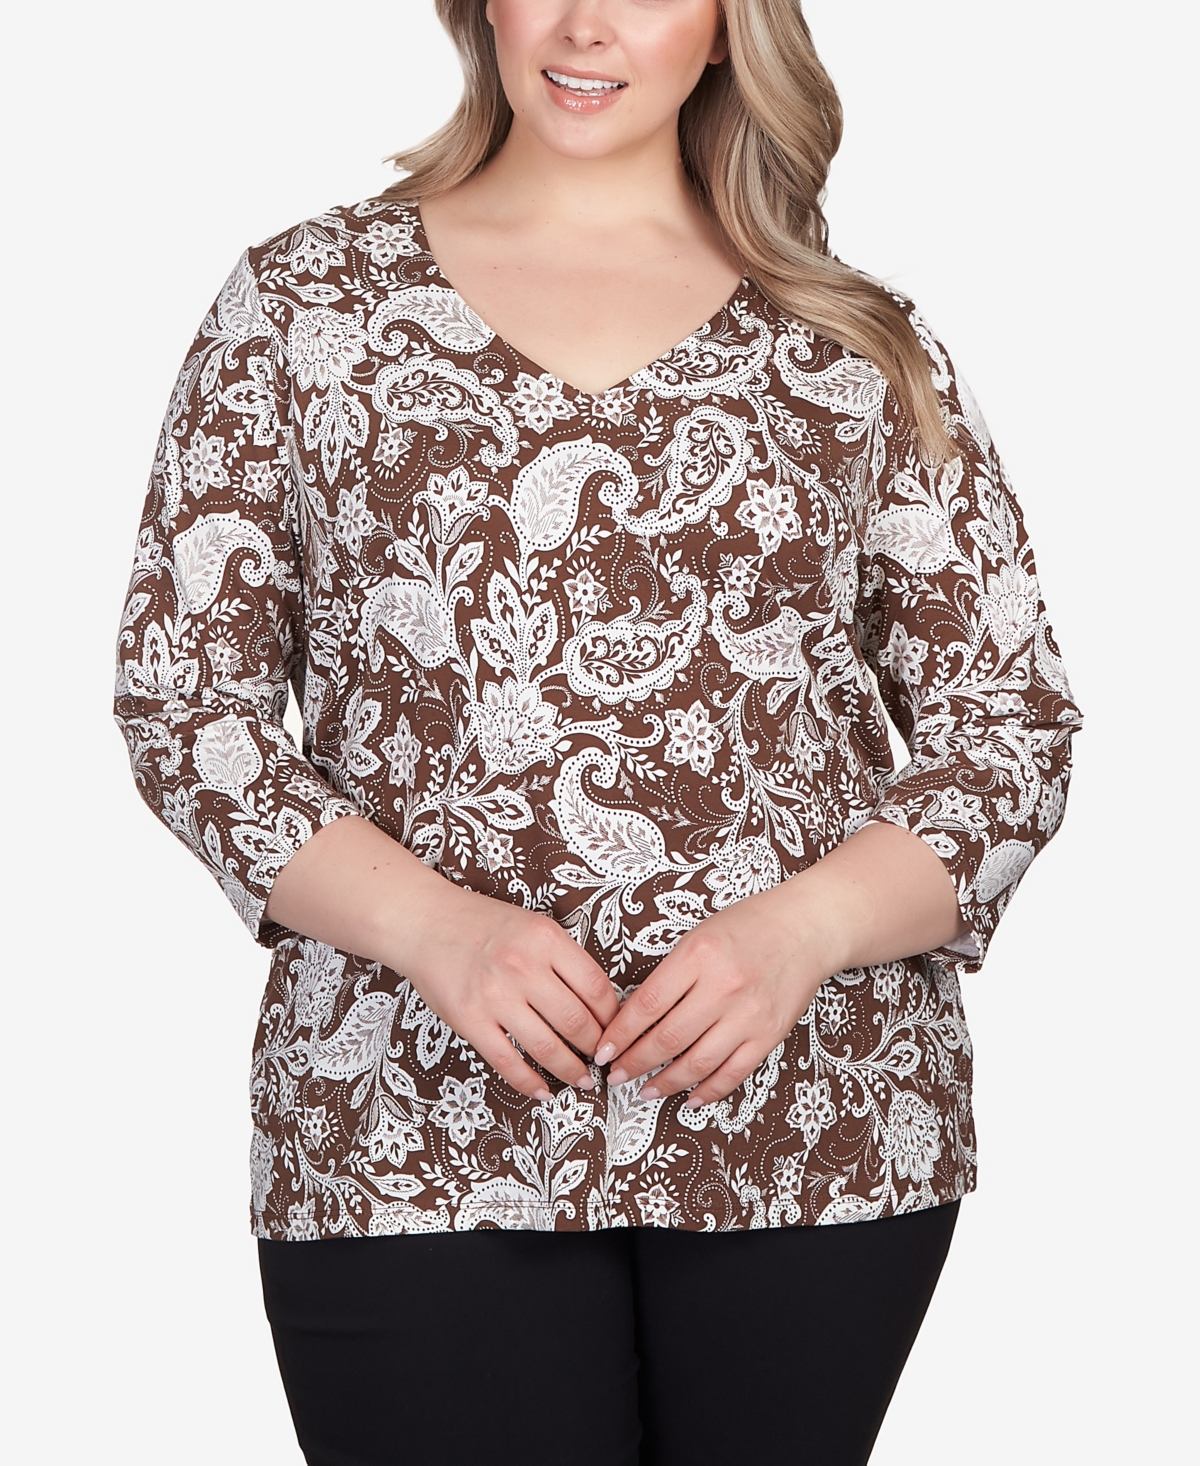 Plus Size Teal The Show Printed 3/4 Sleeve Top - Cocoa Multi